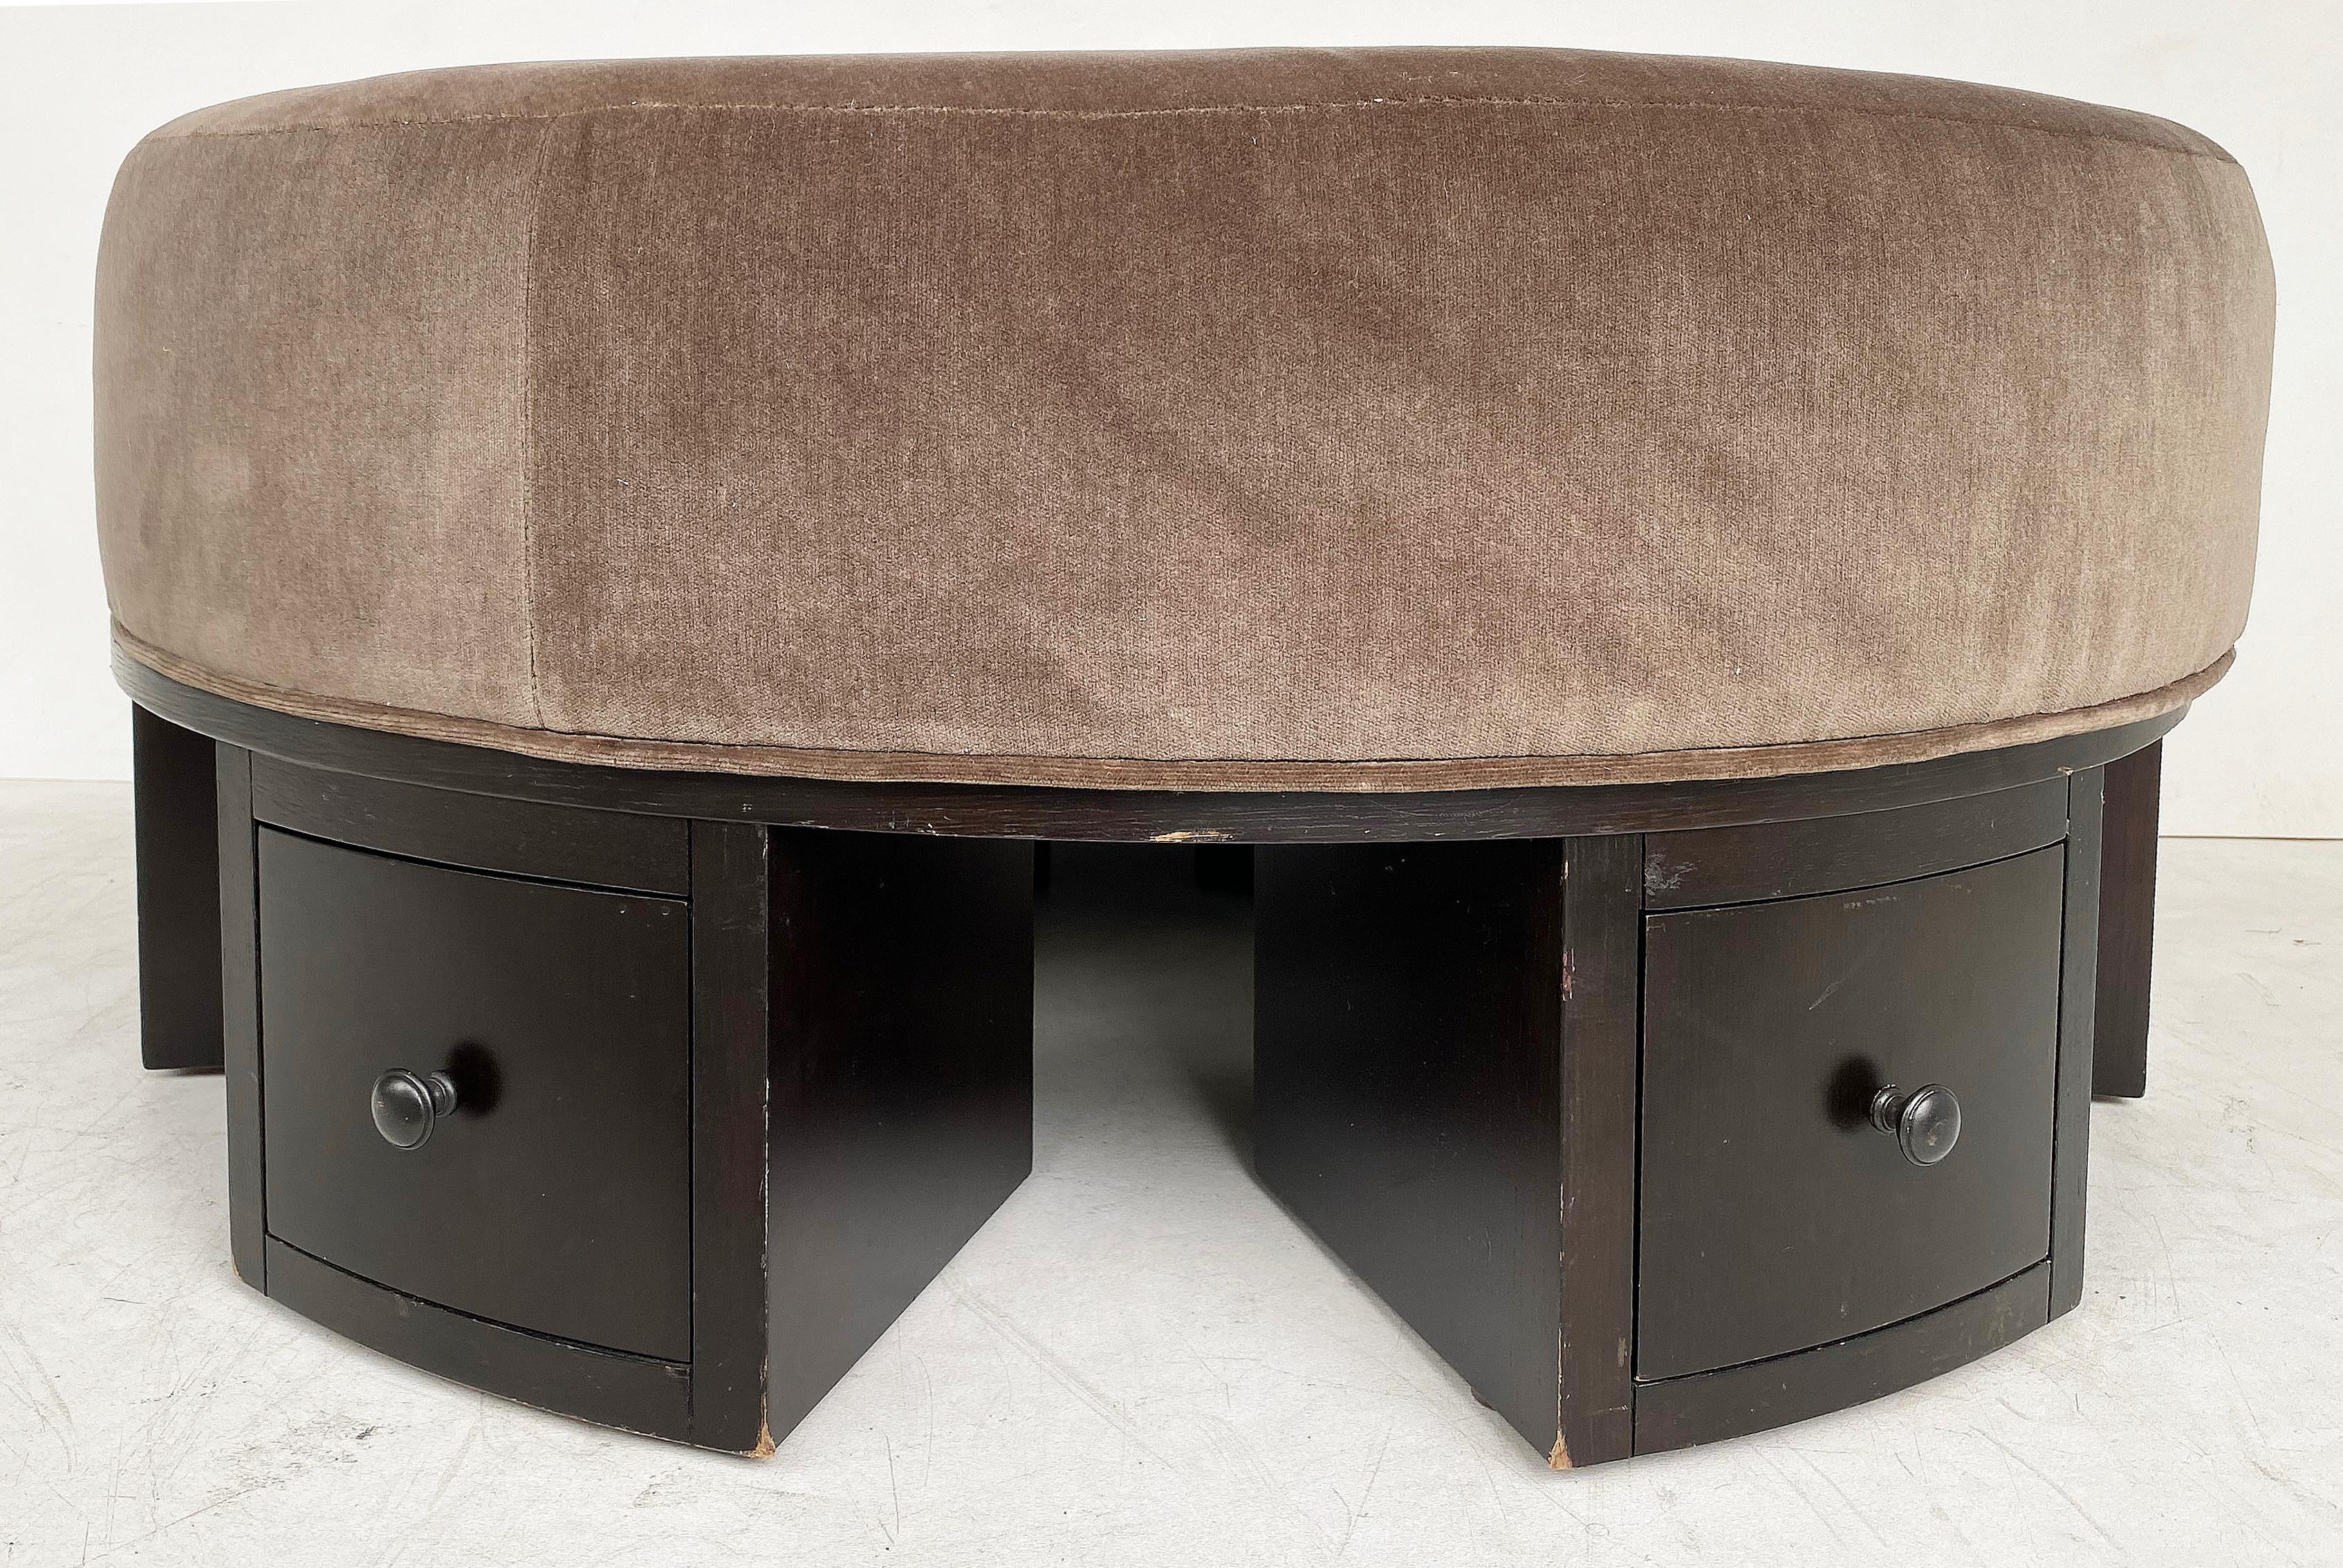 20th Century Large Ottoman Pouf with Drawers Base by Hotel Maison